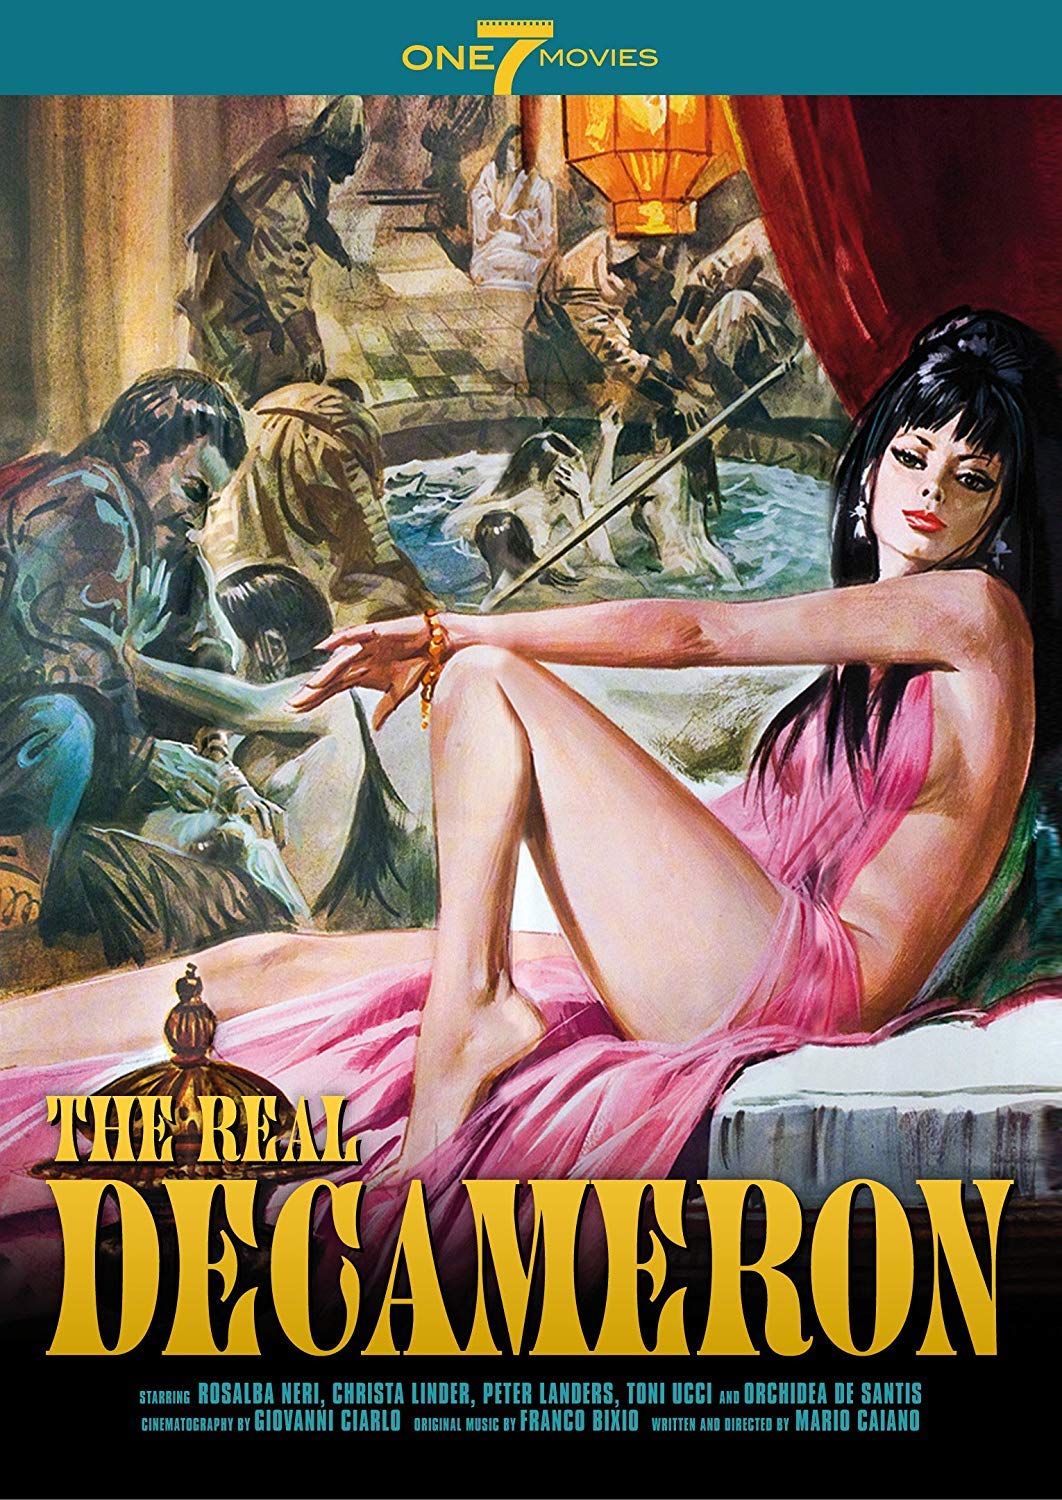 THE REAL DECAMERON DVD